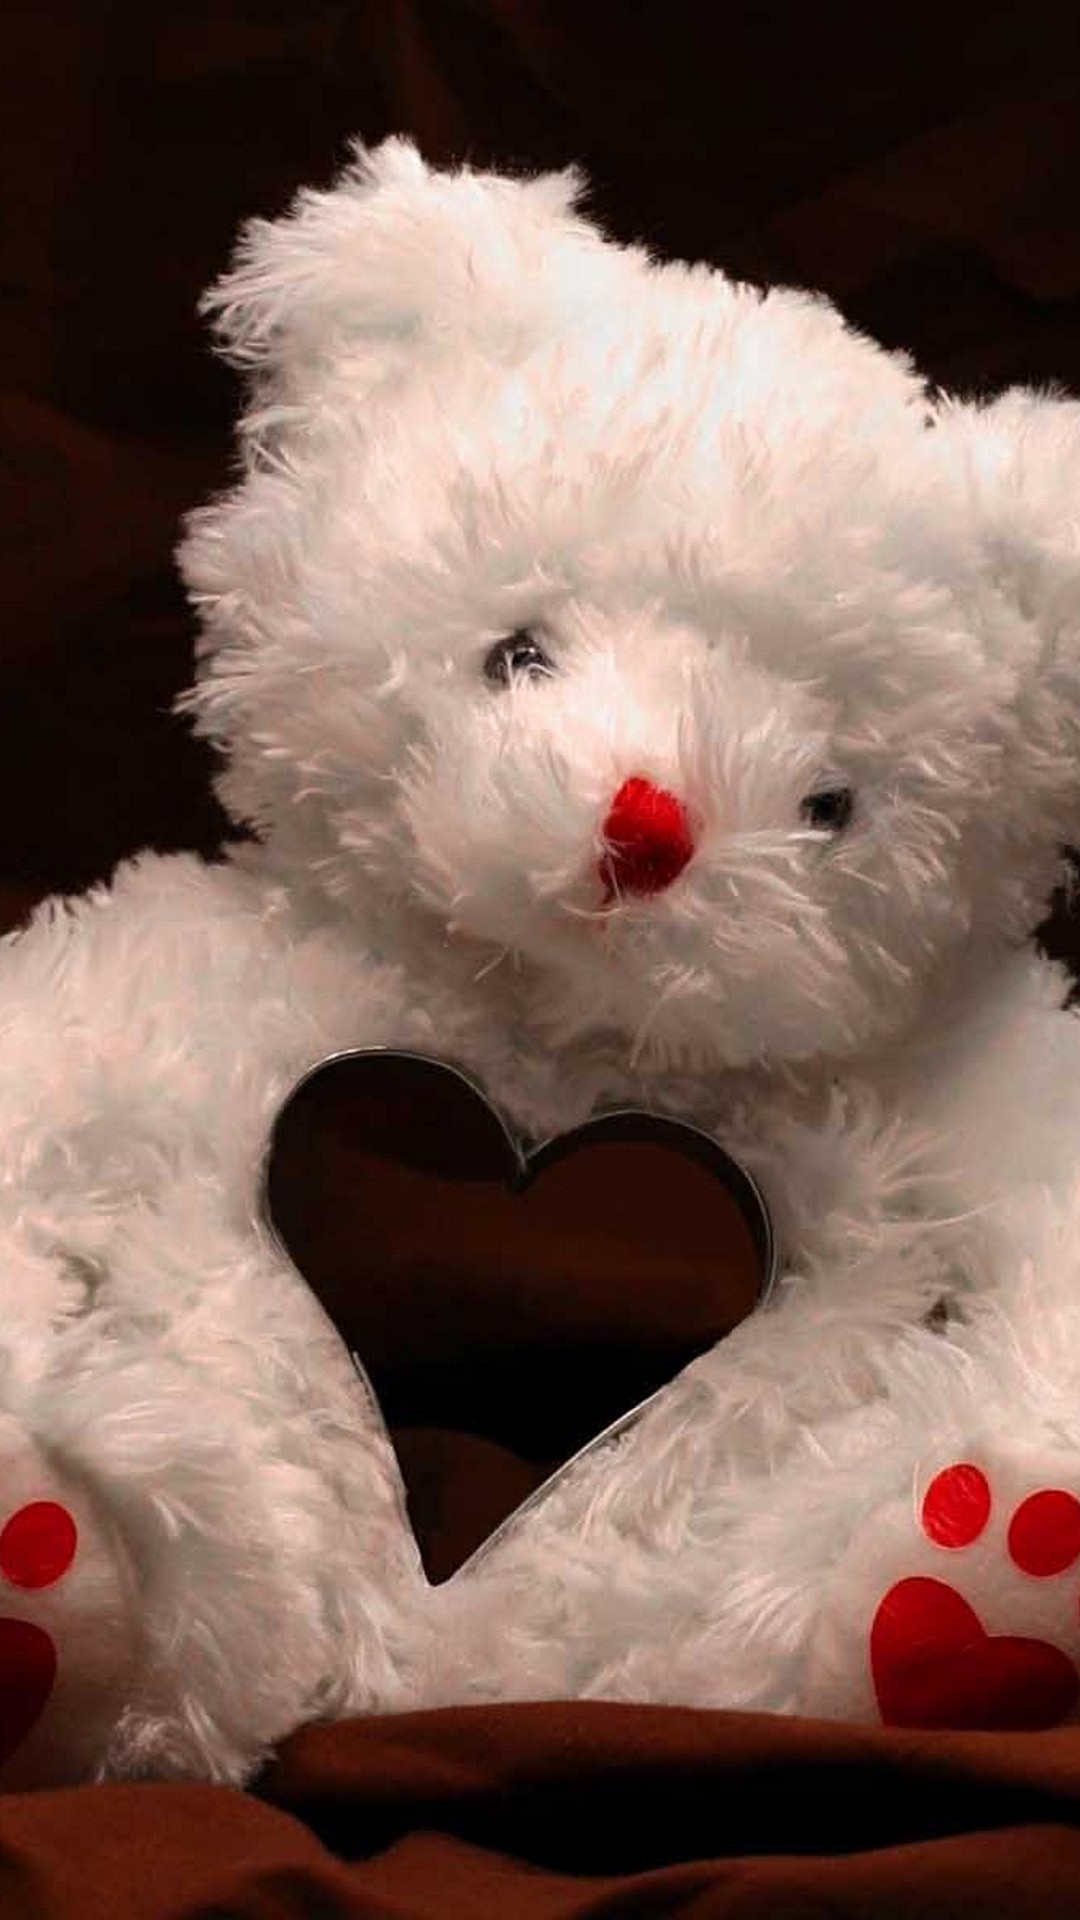 Android Wallpaper Hd Teddy Bear With Image Resolution - Full Hd Teddy Bear - HD Wallpaper 